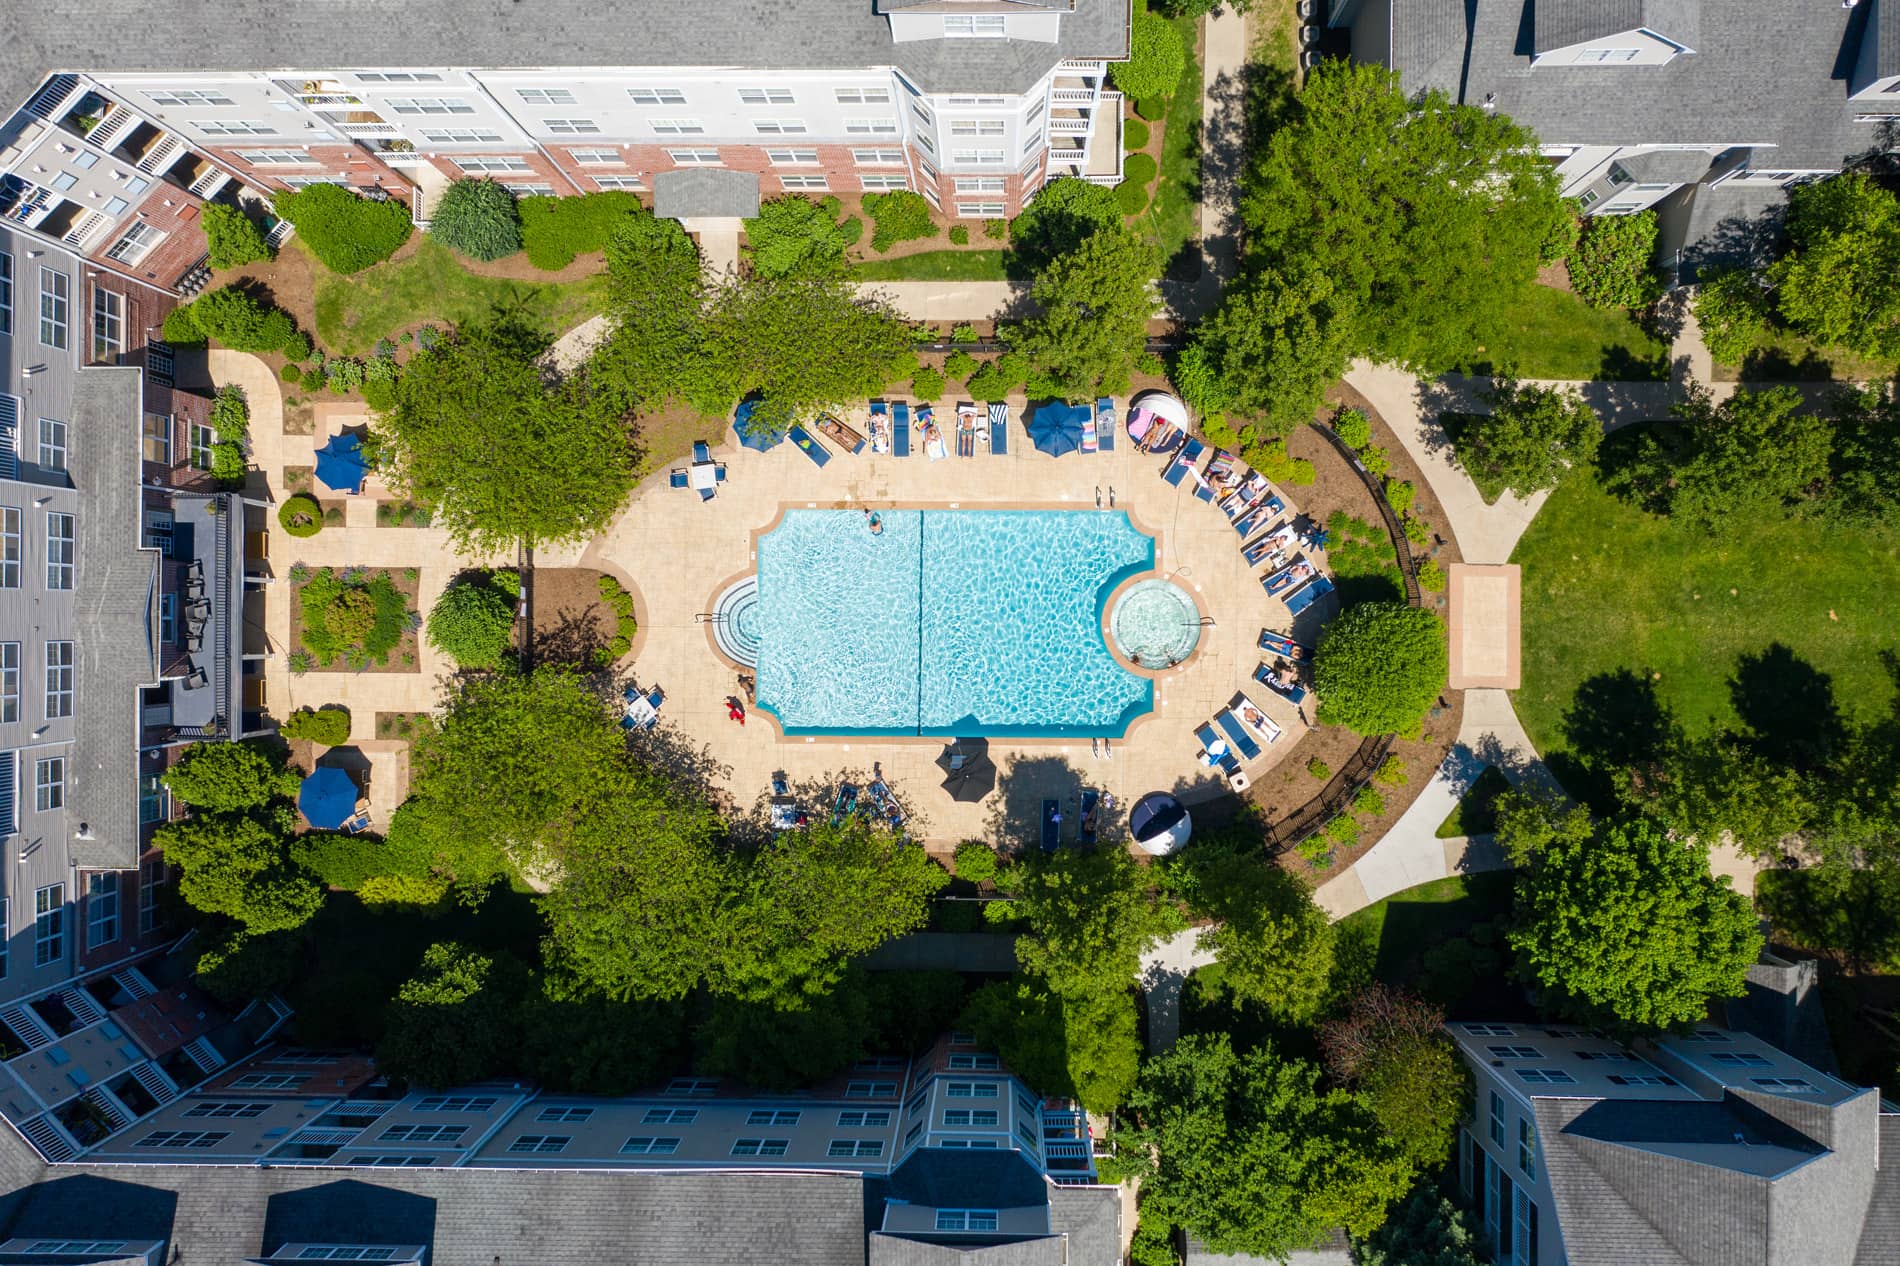 14 North Apartments Aerial of Pool